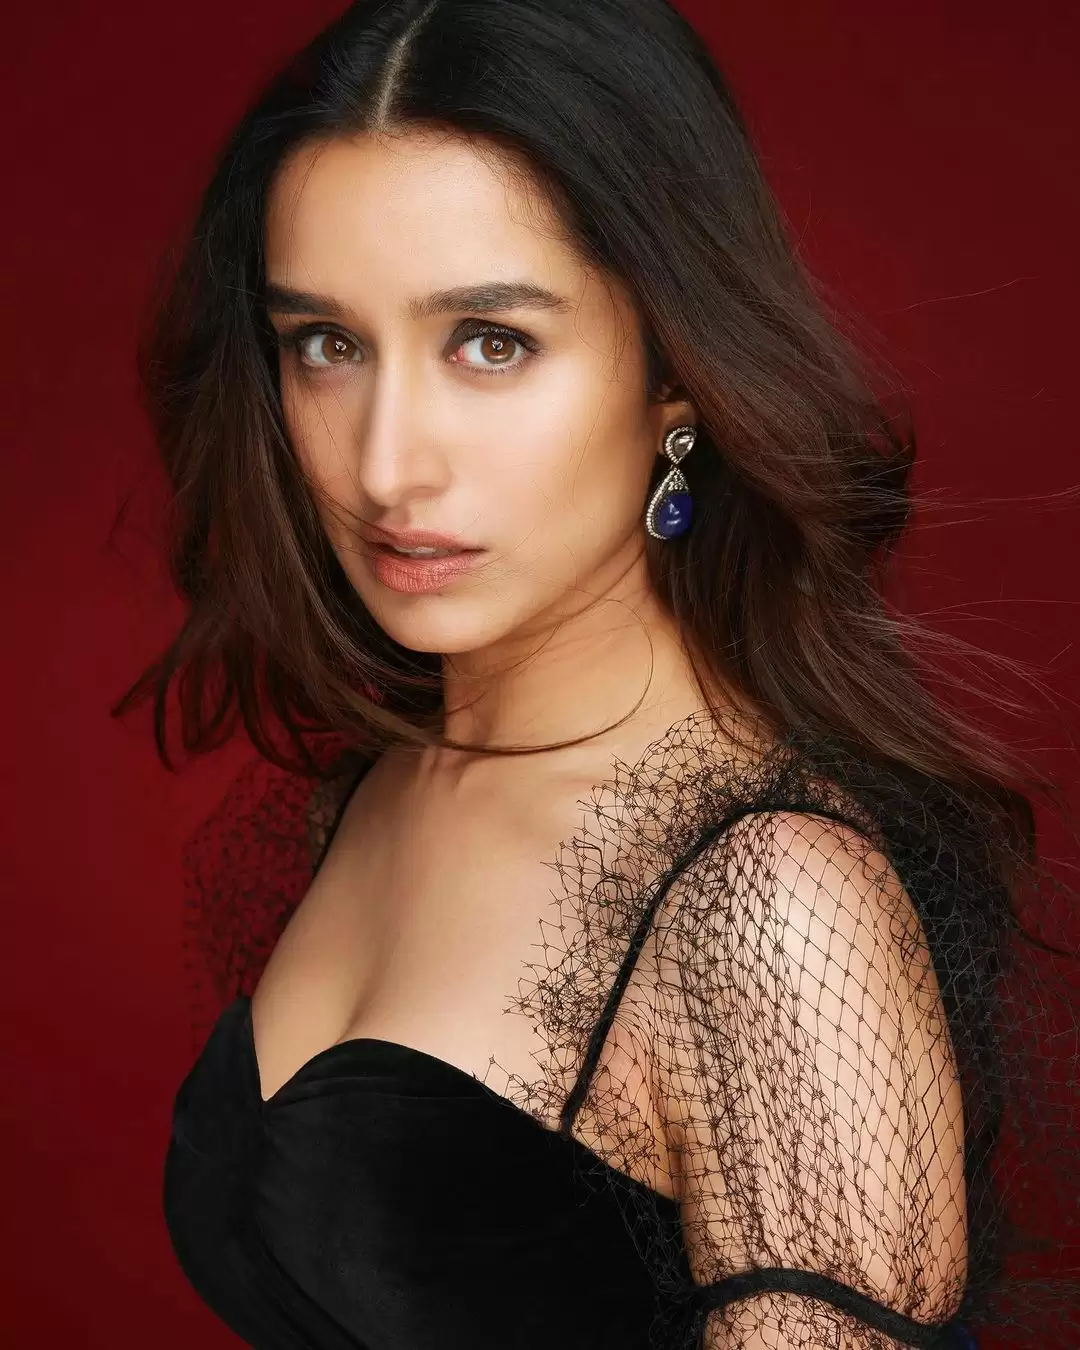 Actress Shraddha Kapoor’s bewitching pictures go viral.